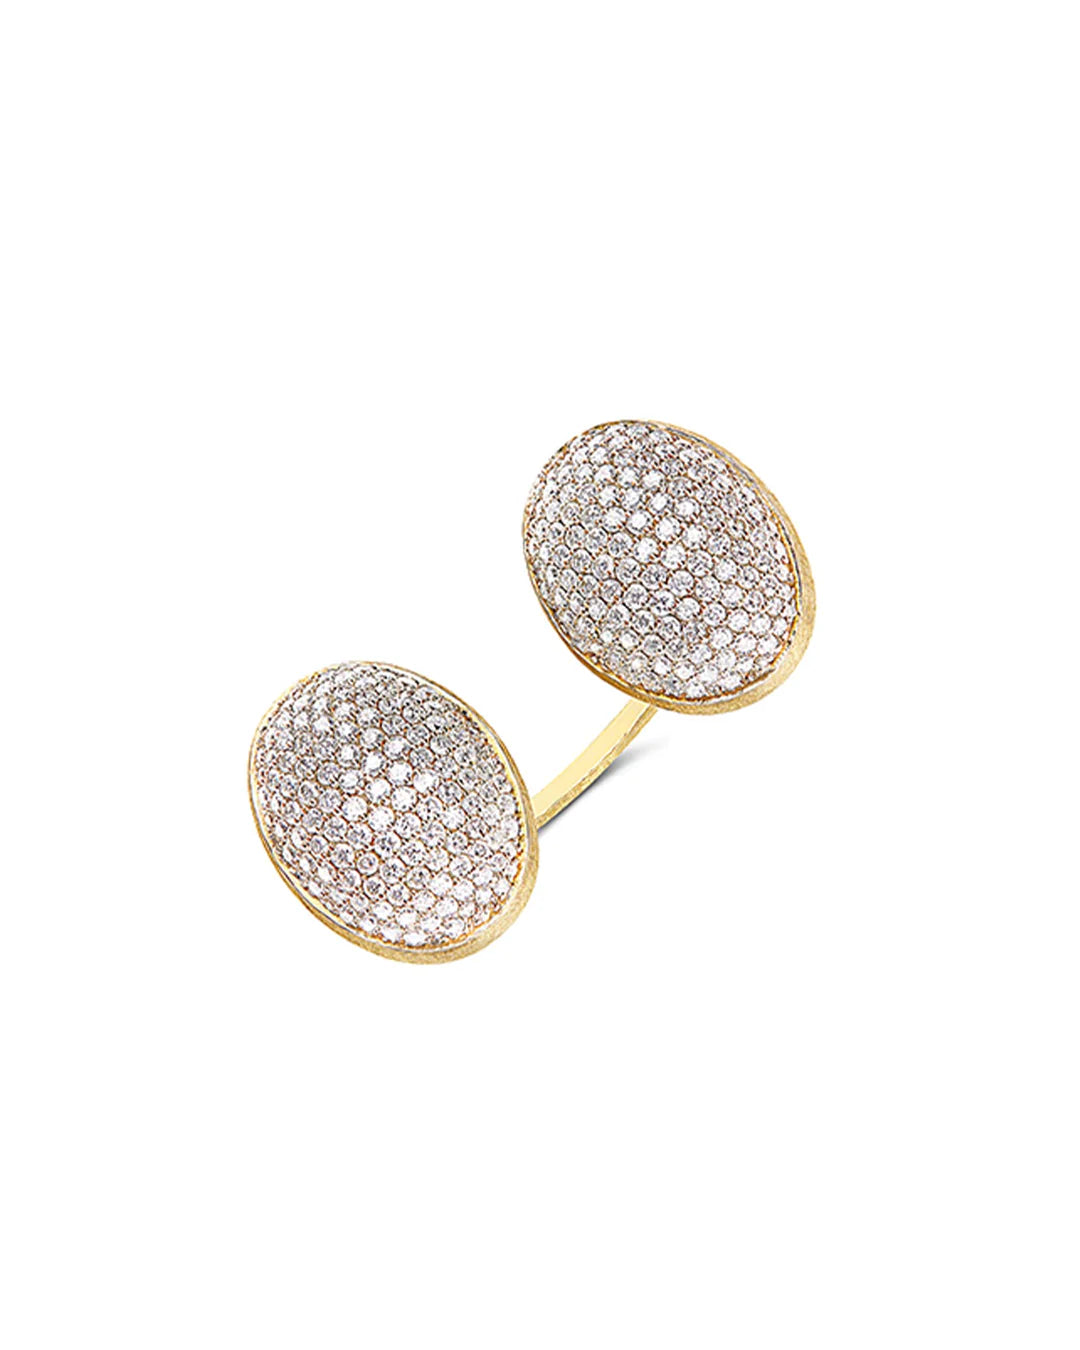 "BUBBLE" STATEMENT RING WITH TWO GOLD AND DIAMONDS BOULES (LARGE)